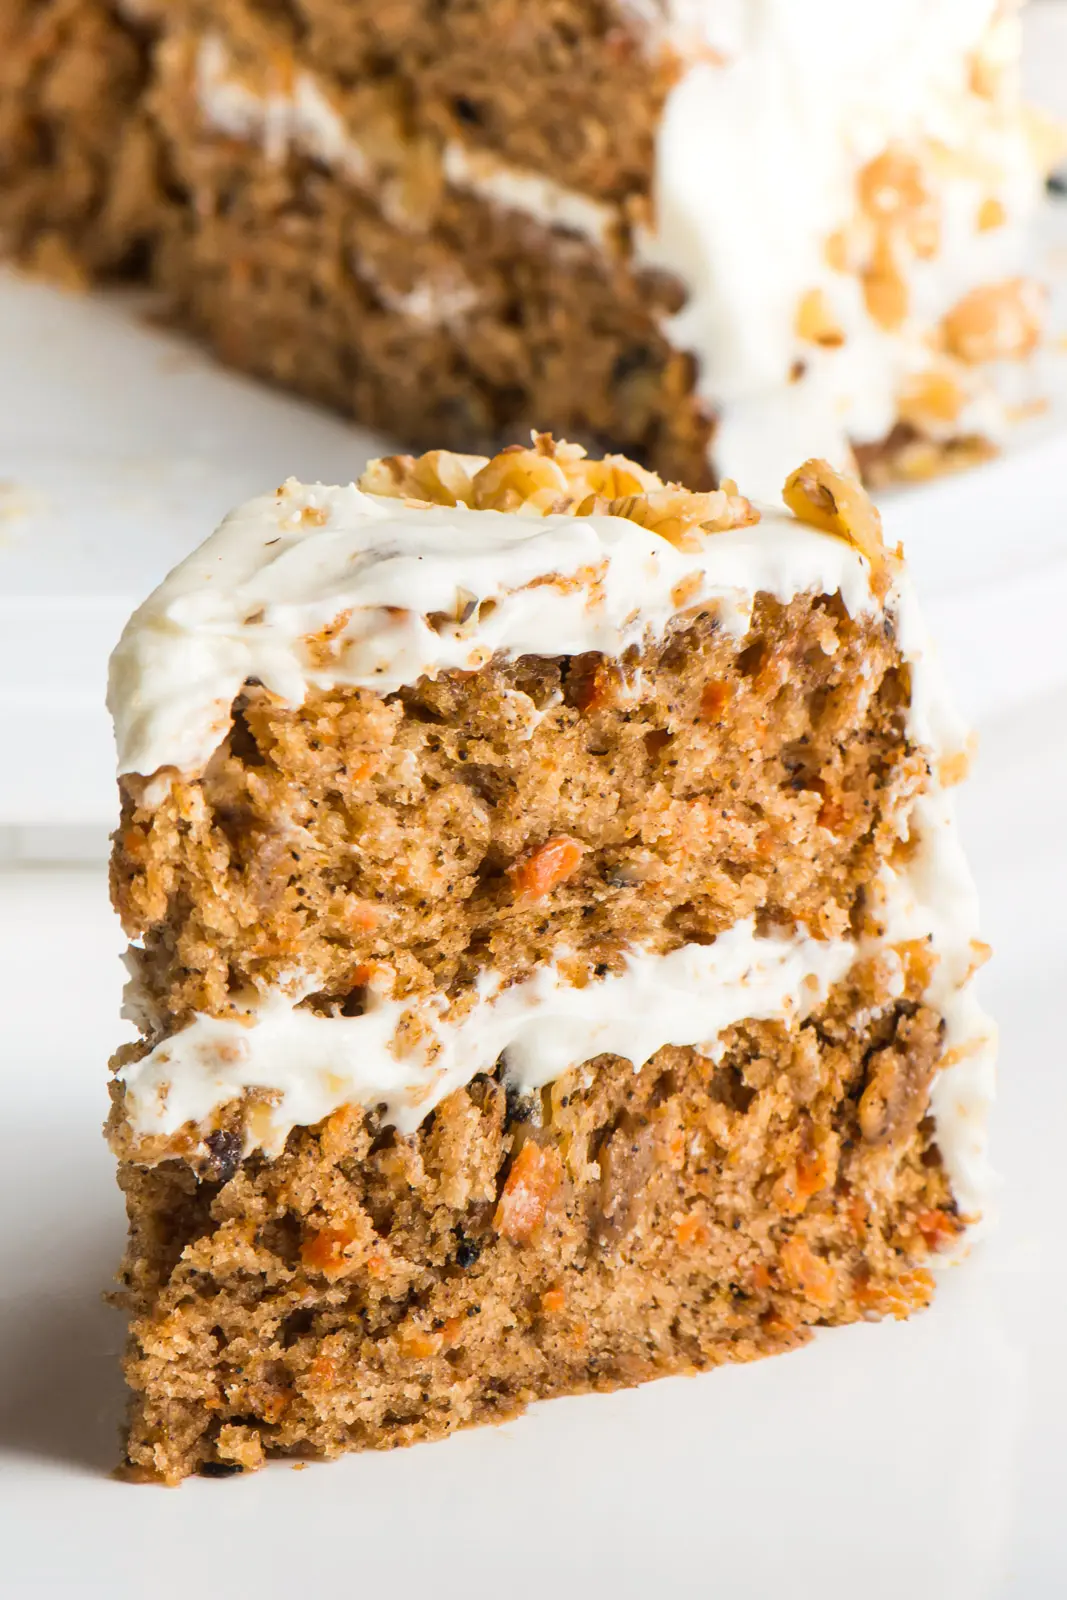 Vegan Carrot Cake with delicious cake layers topped with vegan cream cheese frosting.